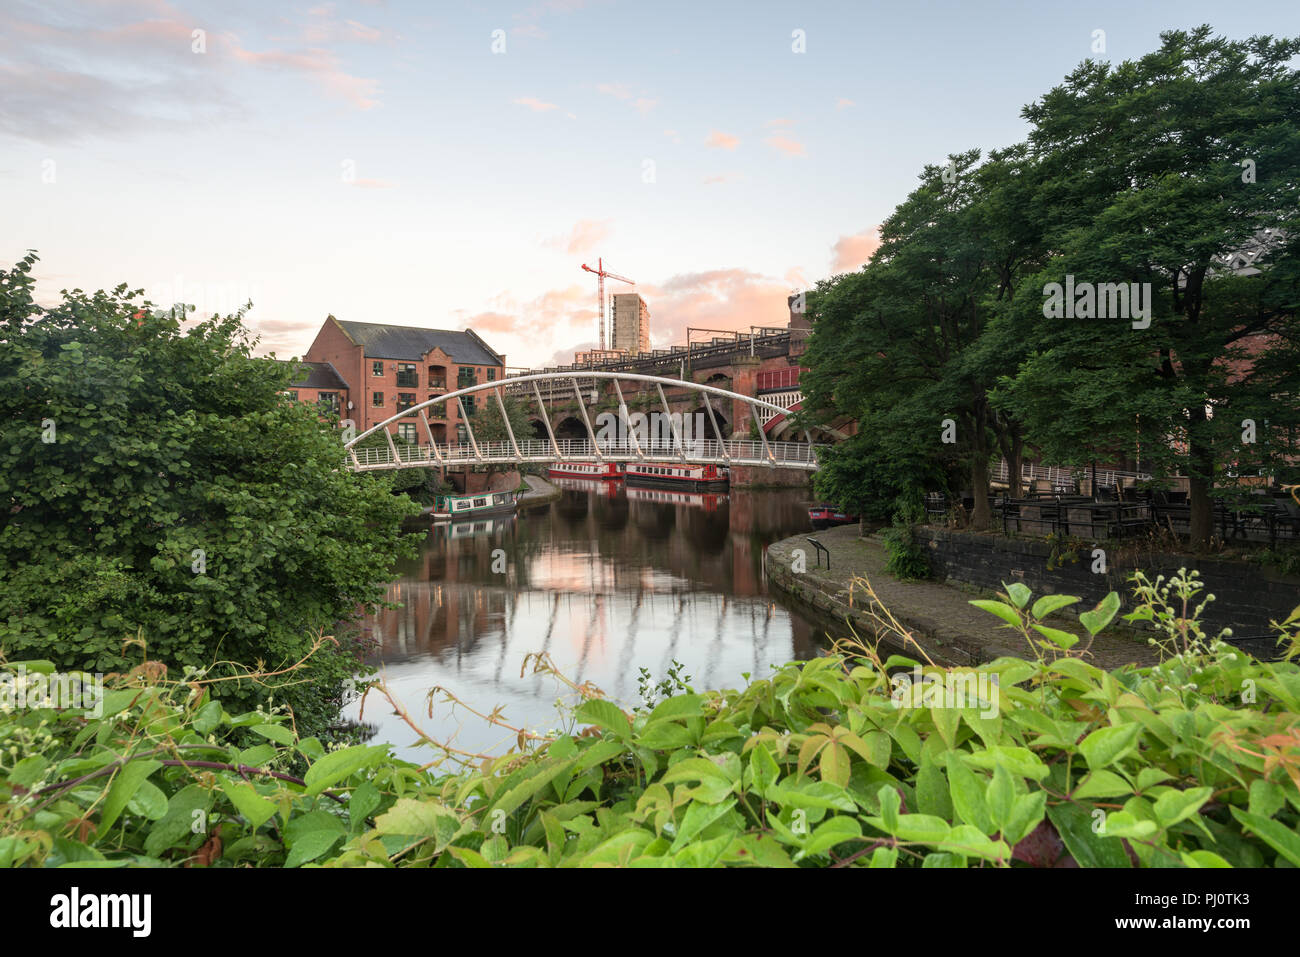 View towards the Whitby and Bird Merchant's footbridge in Castlefield, Manchester Stock Photo